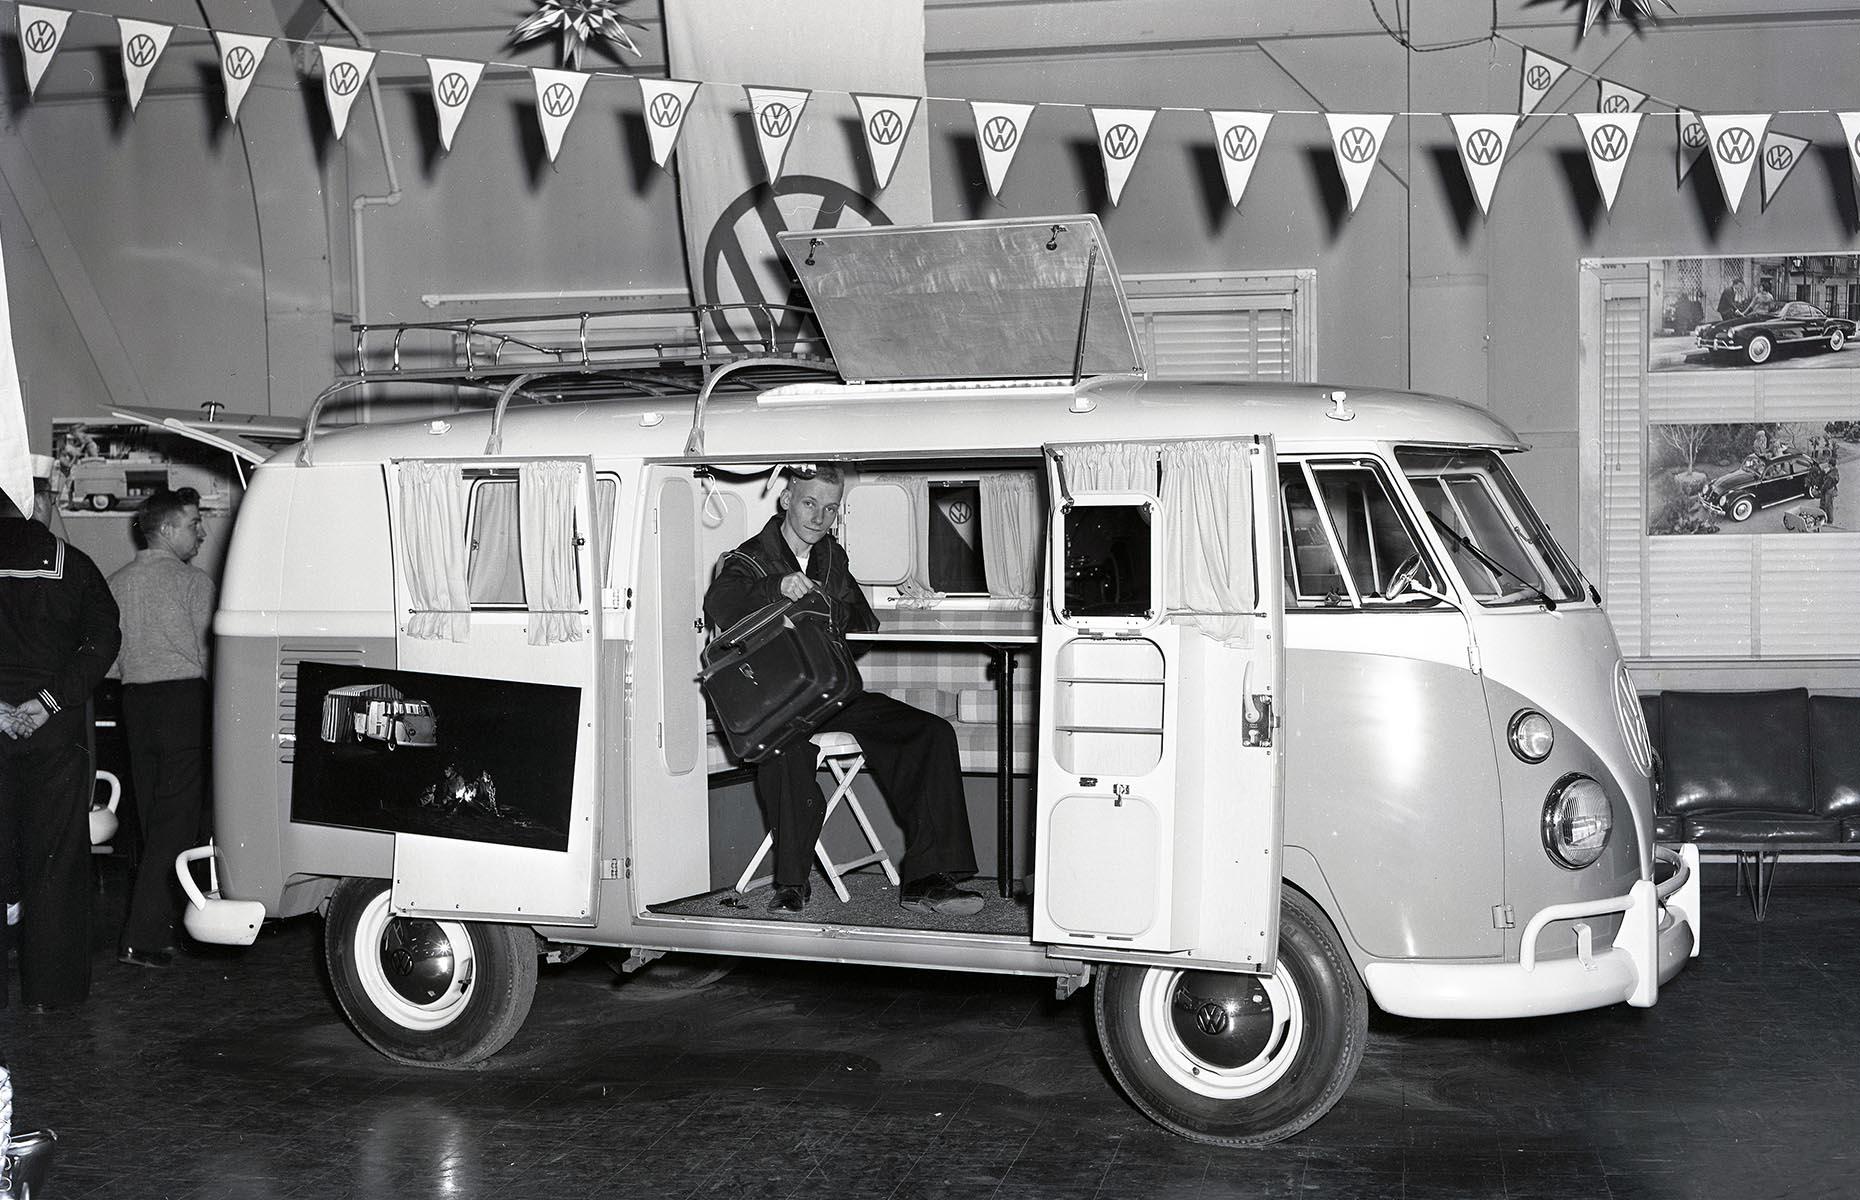 Motorized RVs, though still pricey, continued to gain in popularity in the 1950s, helped along by a post-war manufacturing boom. And it was in this decade that the Volkswagen camper van debuted, representing a major milestone in RV history. The Volkswagen Type 2, which remains a classic today, is pictured here on display at an auto showroom in 1958. It's still loved for its streamlined design, with camping necessities like a bed and a stove.